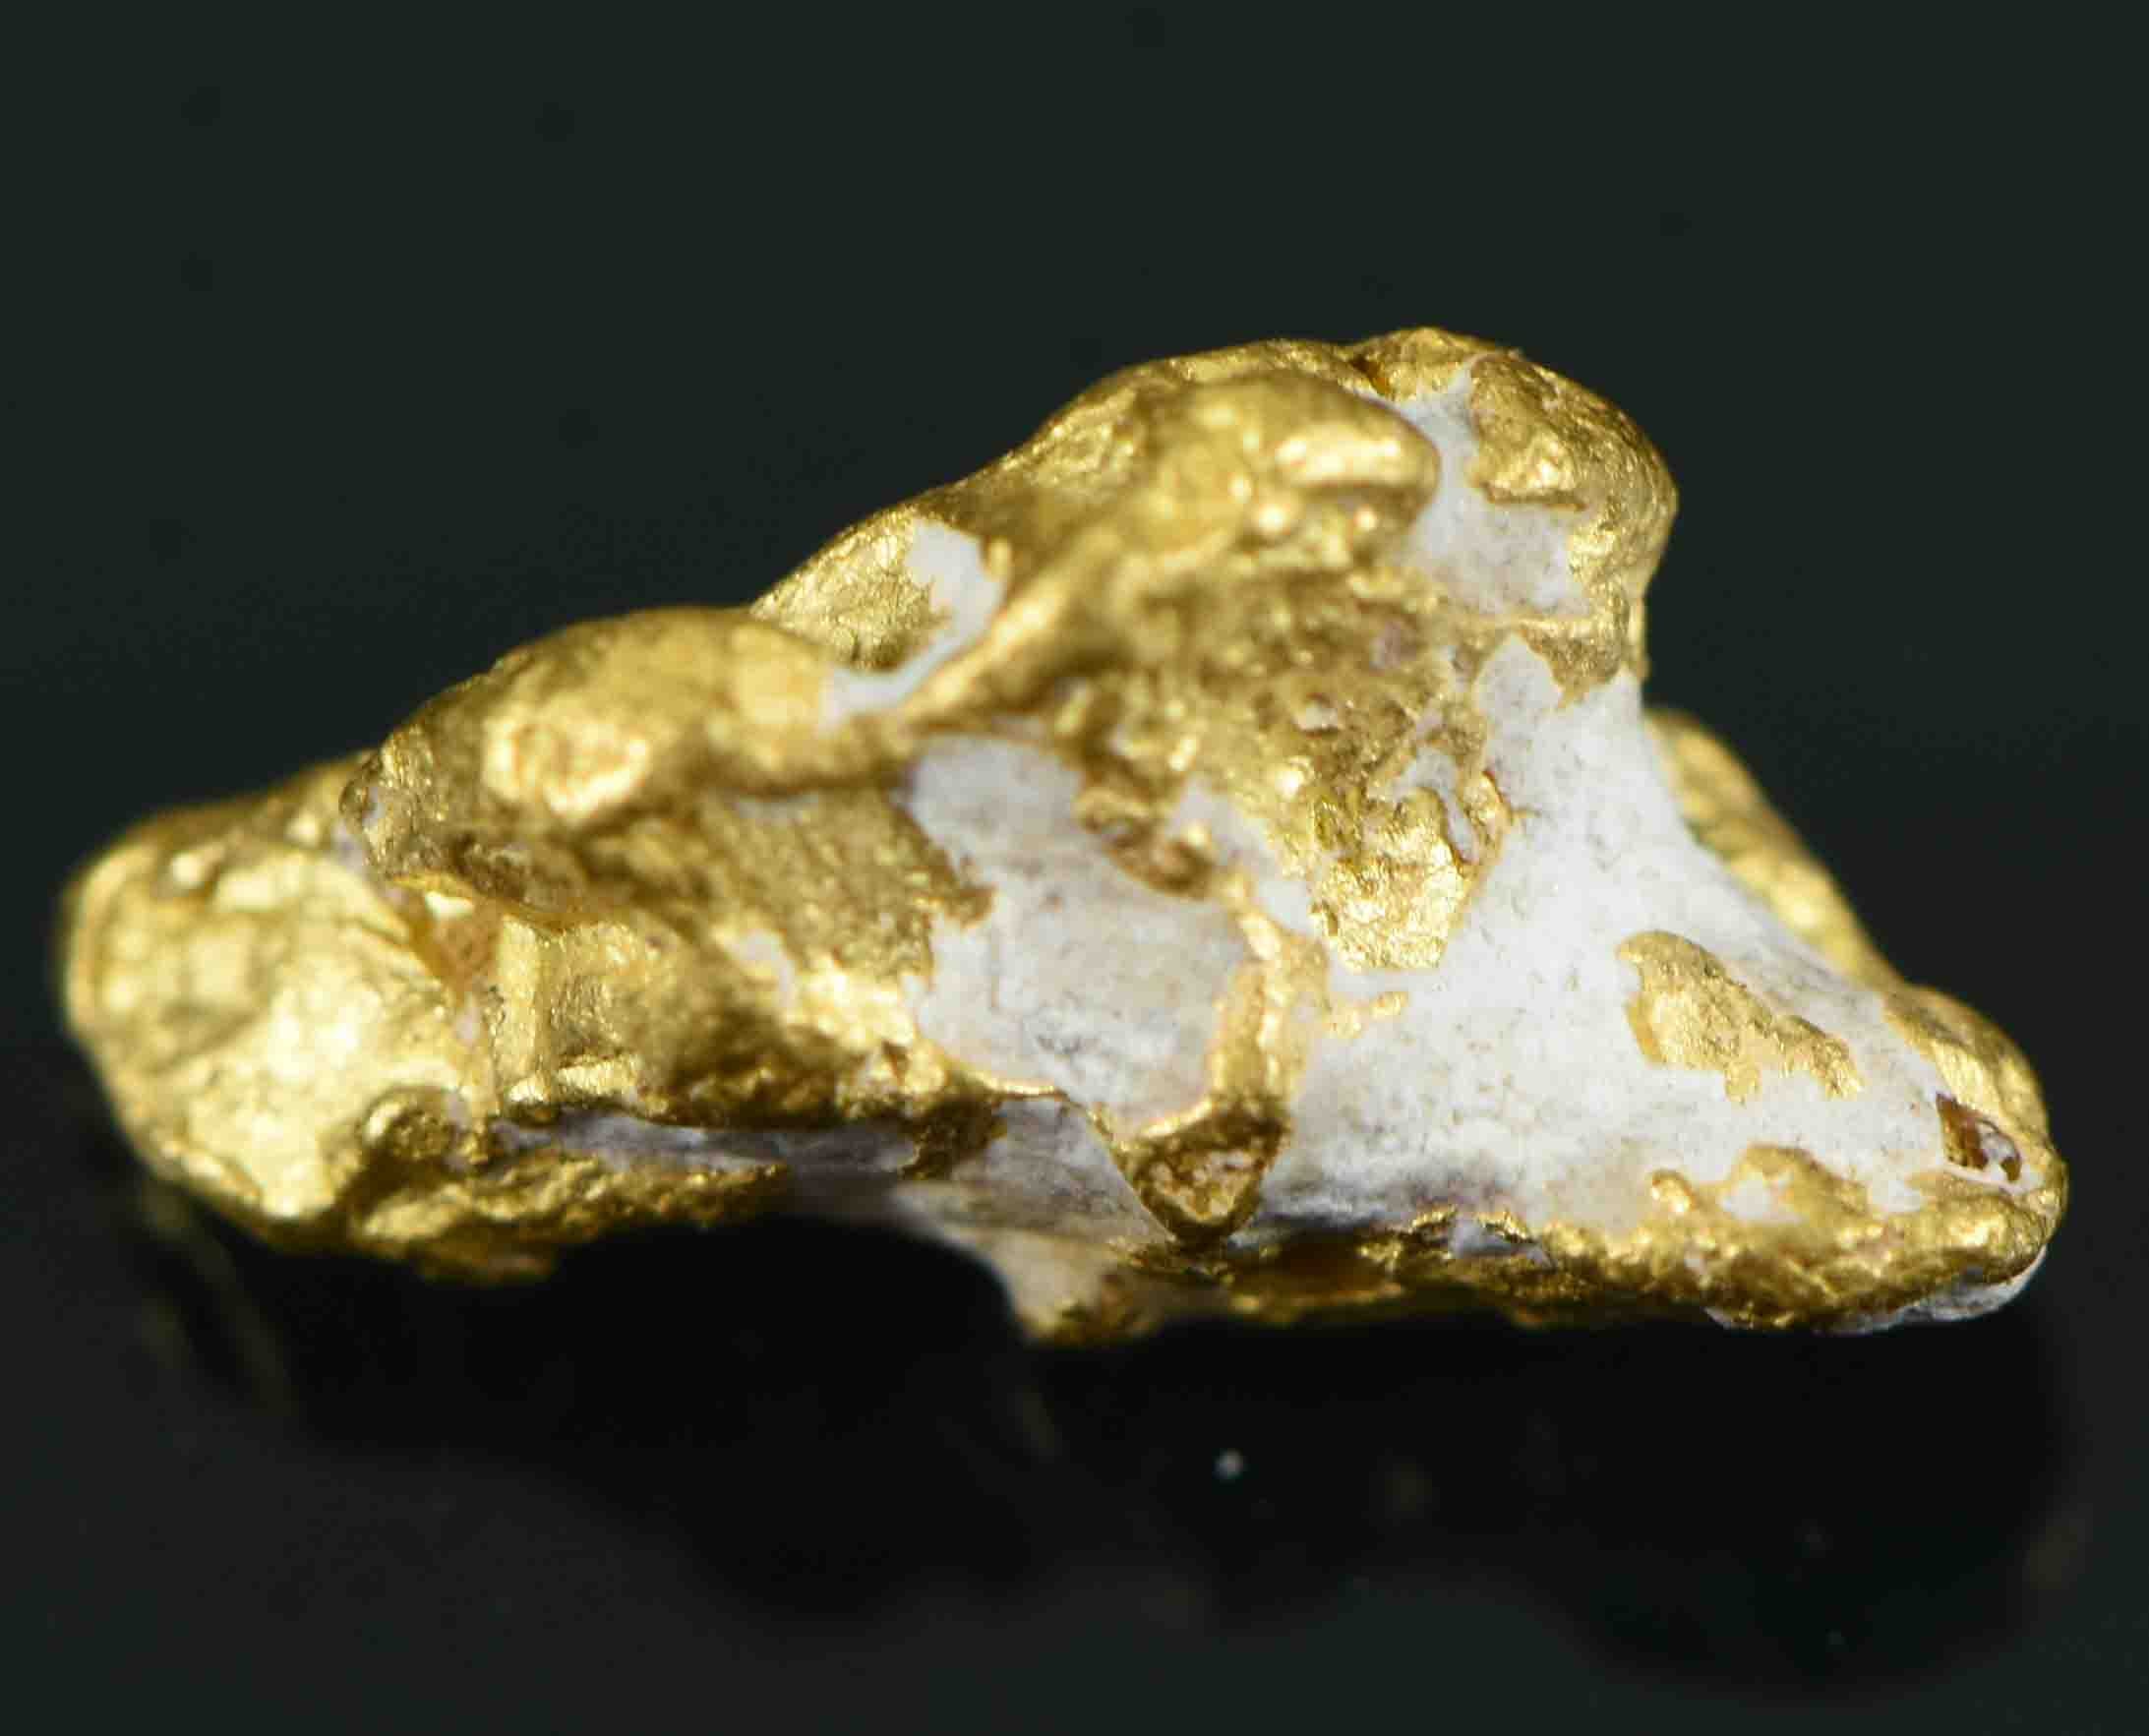 #12 Australian Natural Gold Nugget With Quartz Weighs 1.28 Grams.